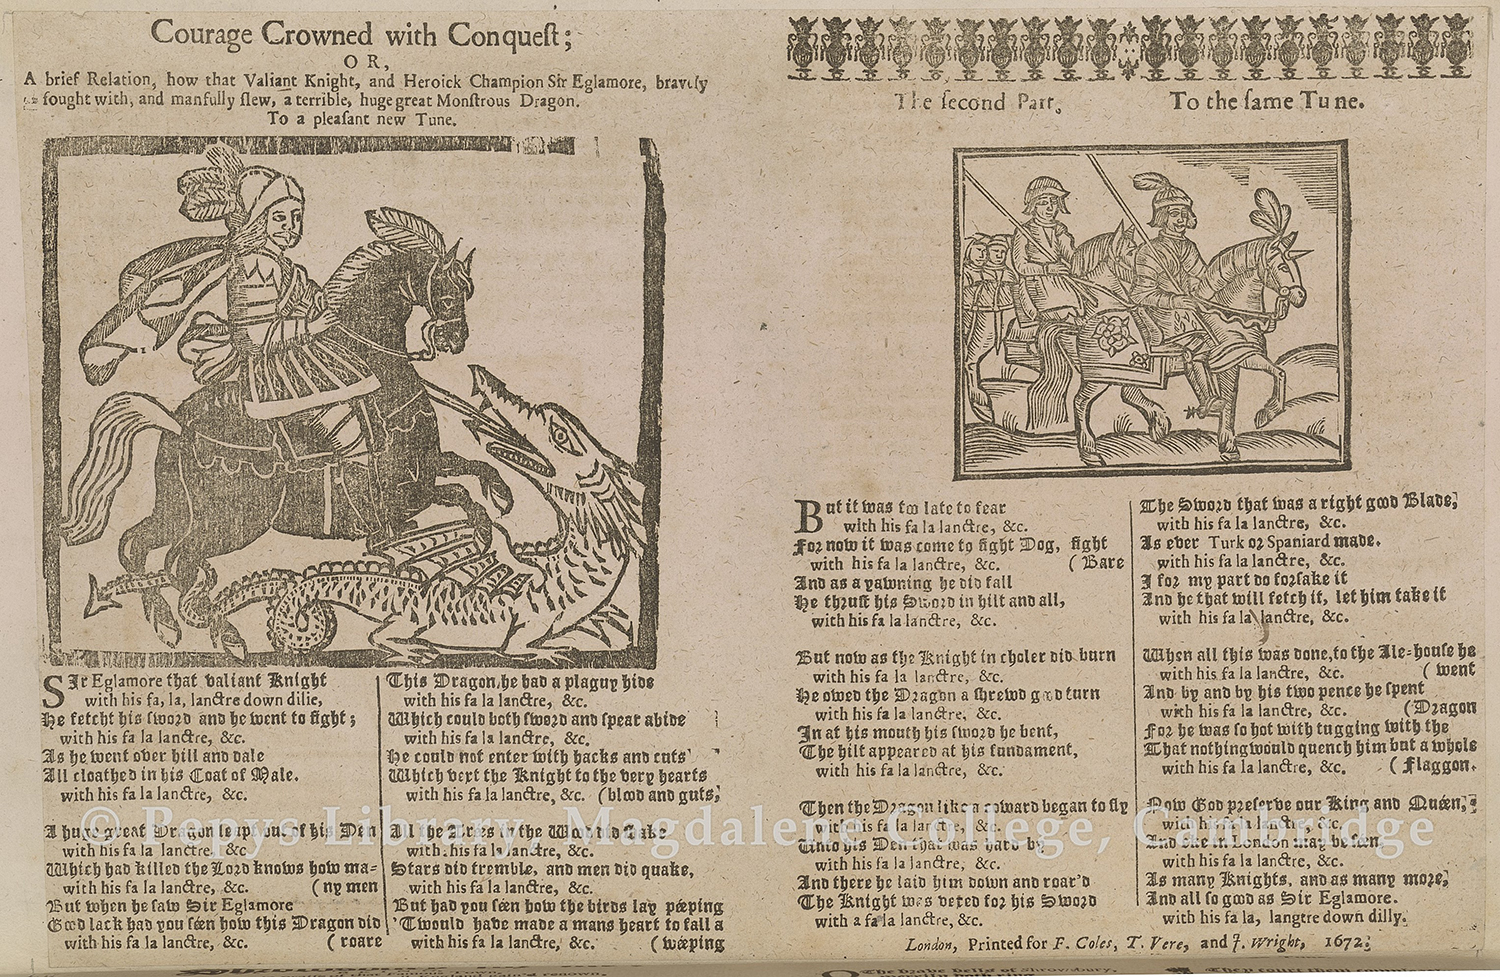 Broadside Ballad Courage Crowned with Conquest (Sir Eglamor) – Pepys Ballads II.134